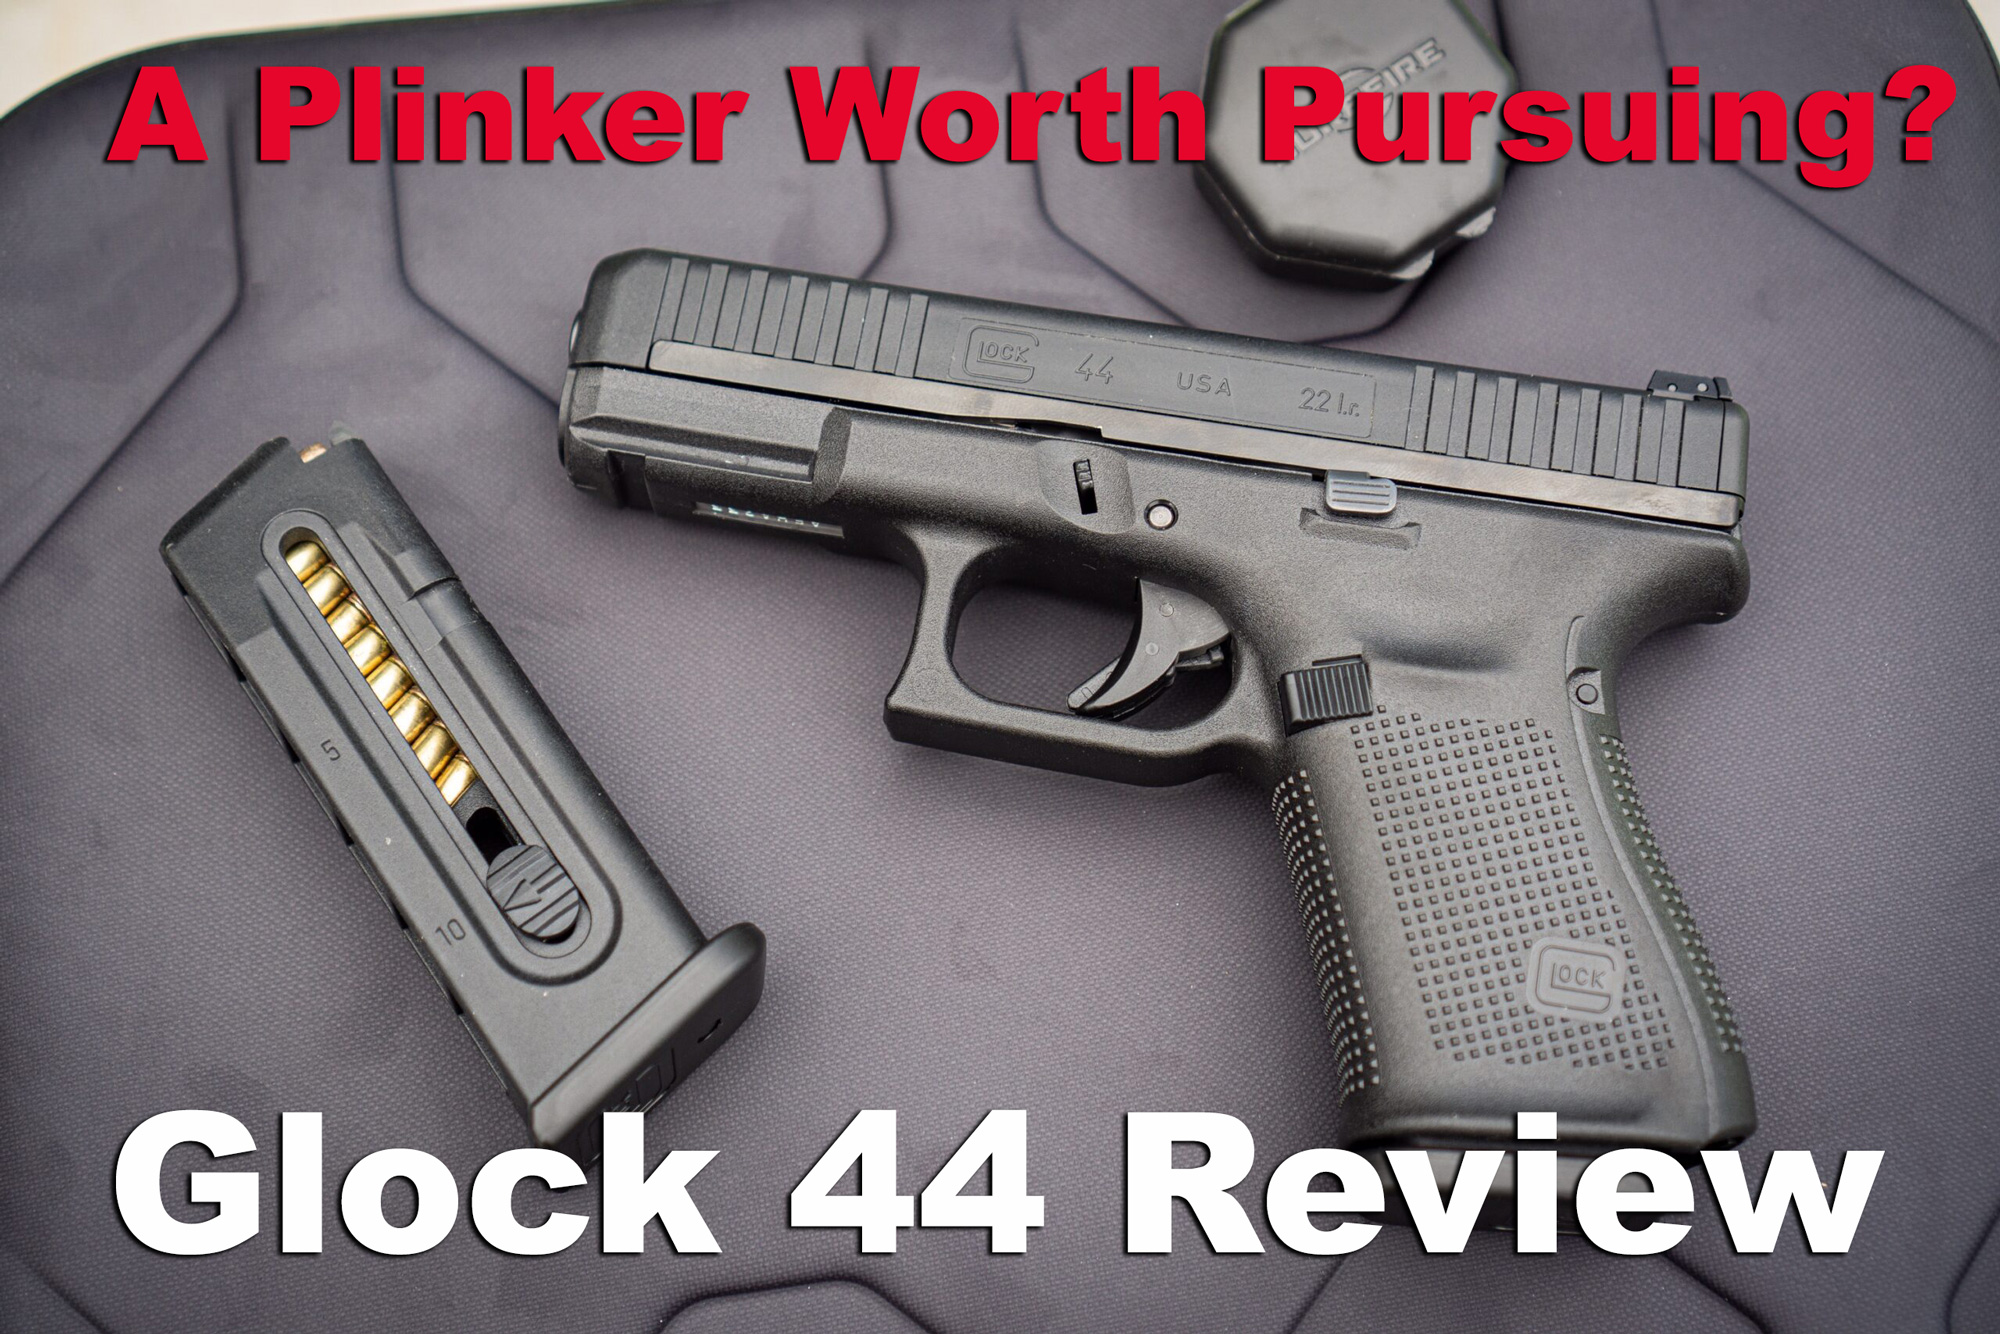 Pistol and ammo magazine used for this Glock 44 Review